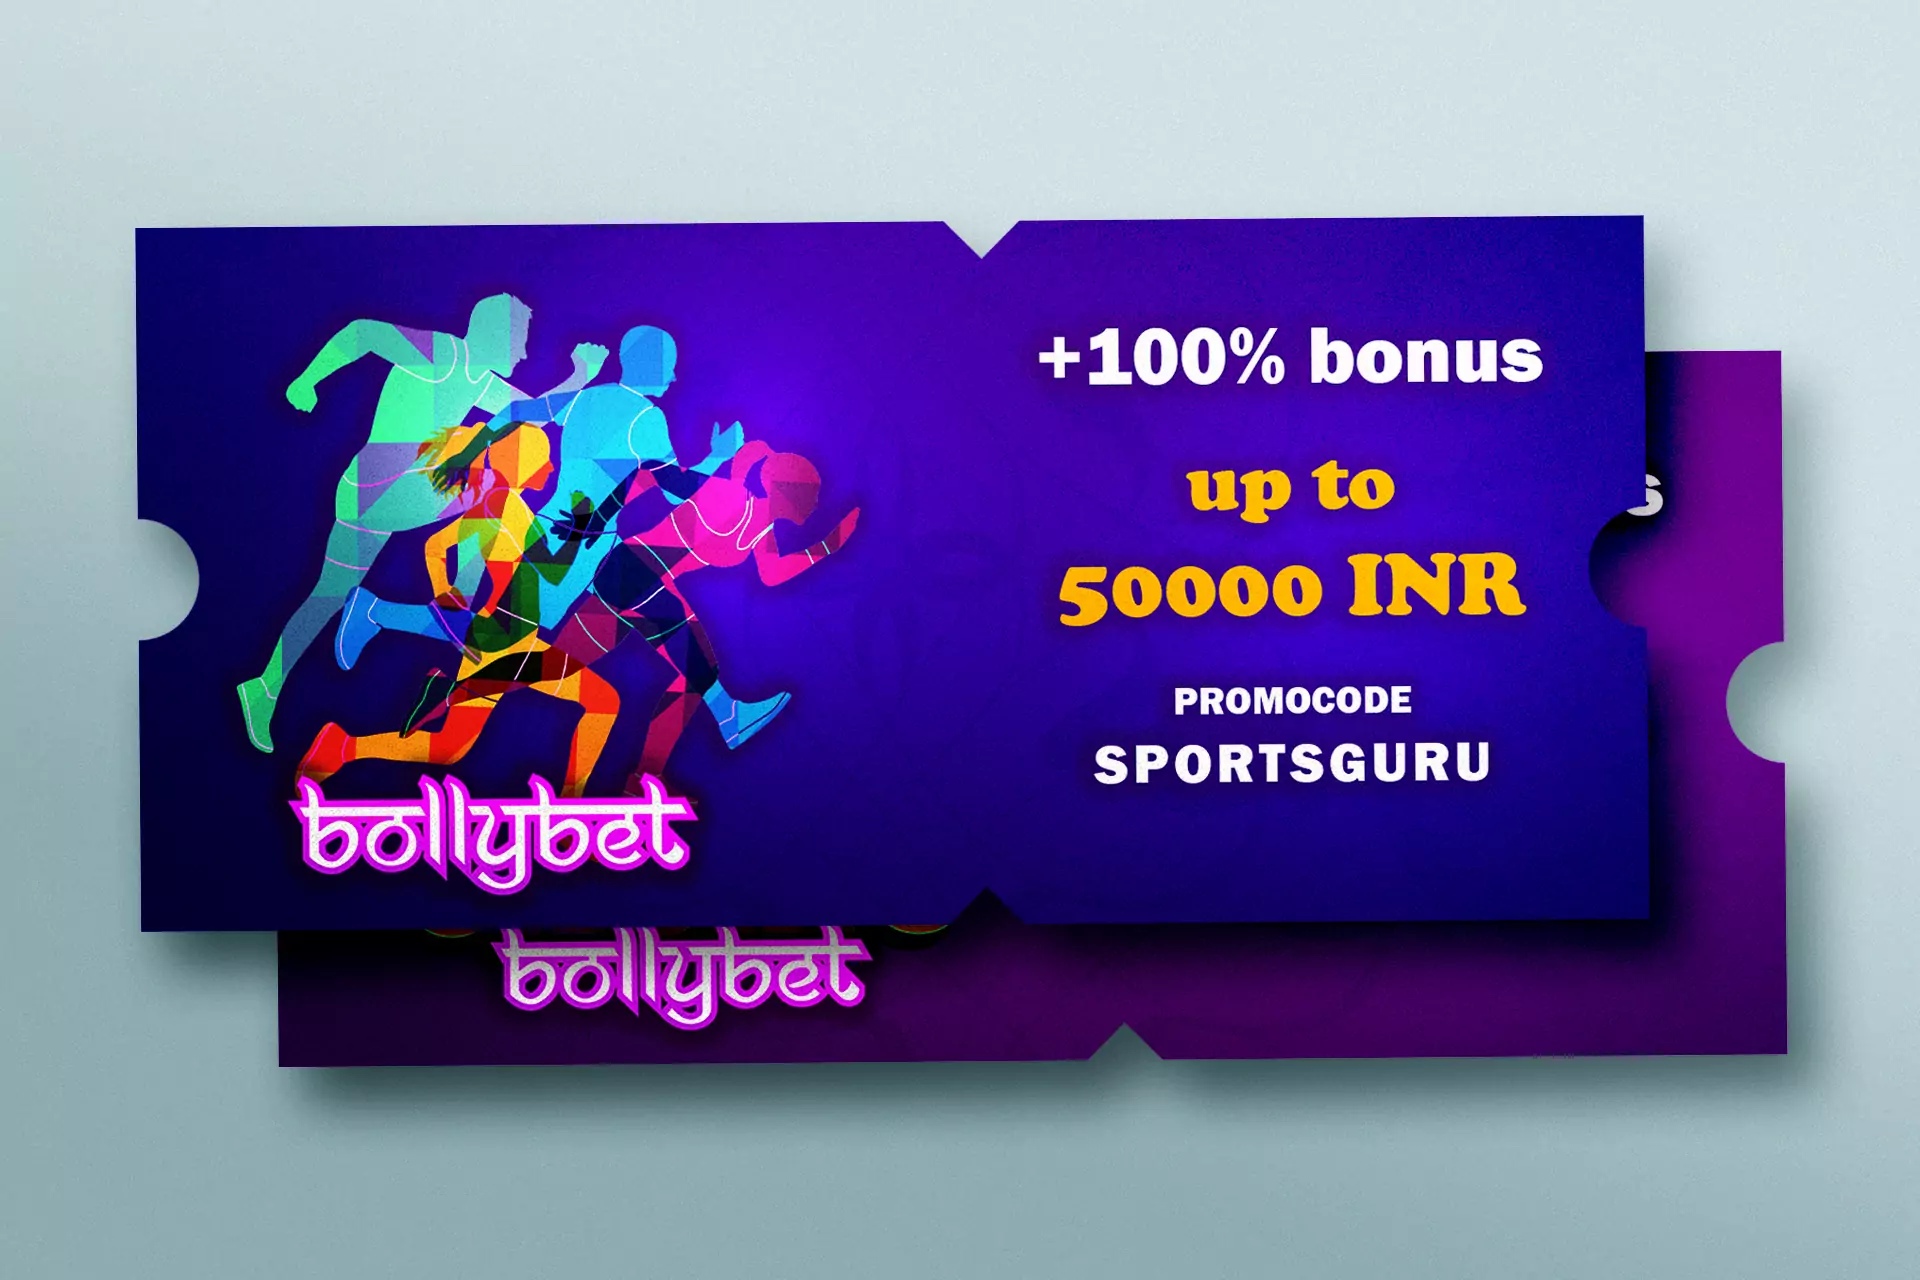 Use promo code SPORTSGURU to get an INR 50,000 bonus on your first deposit for sports betting.